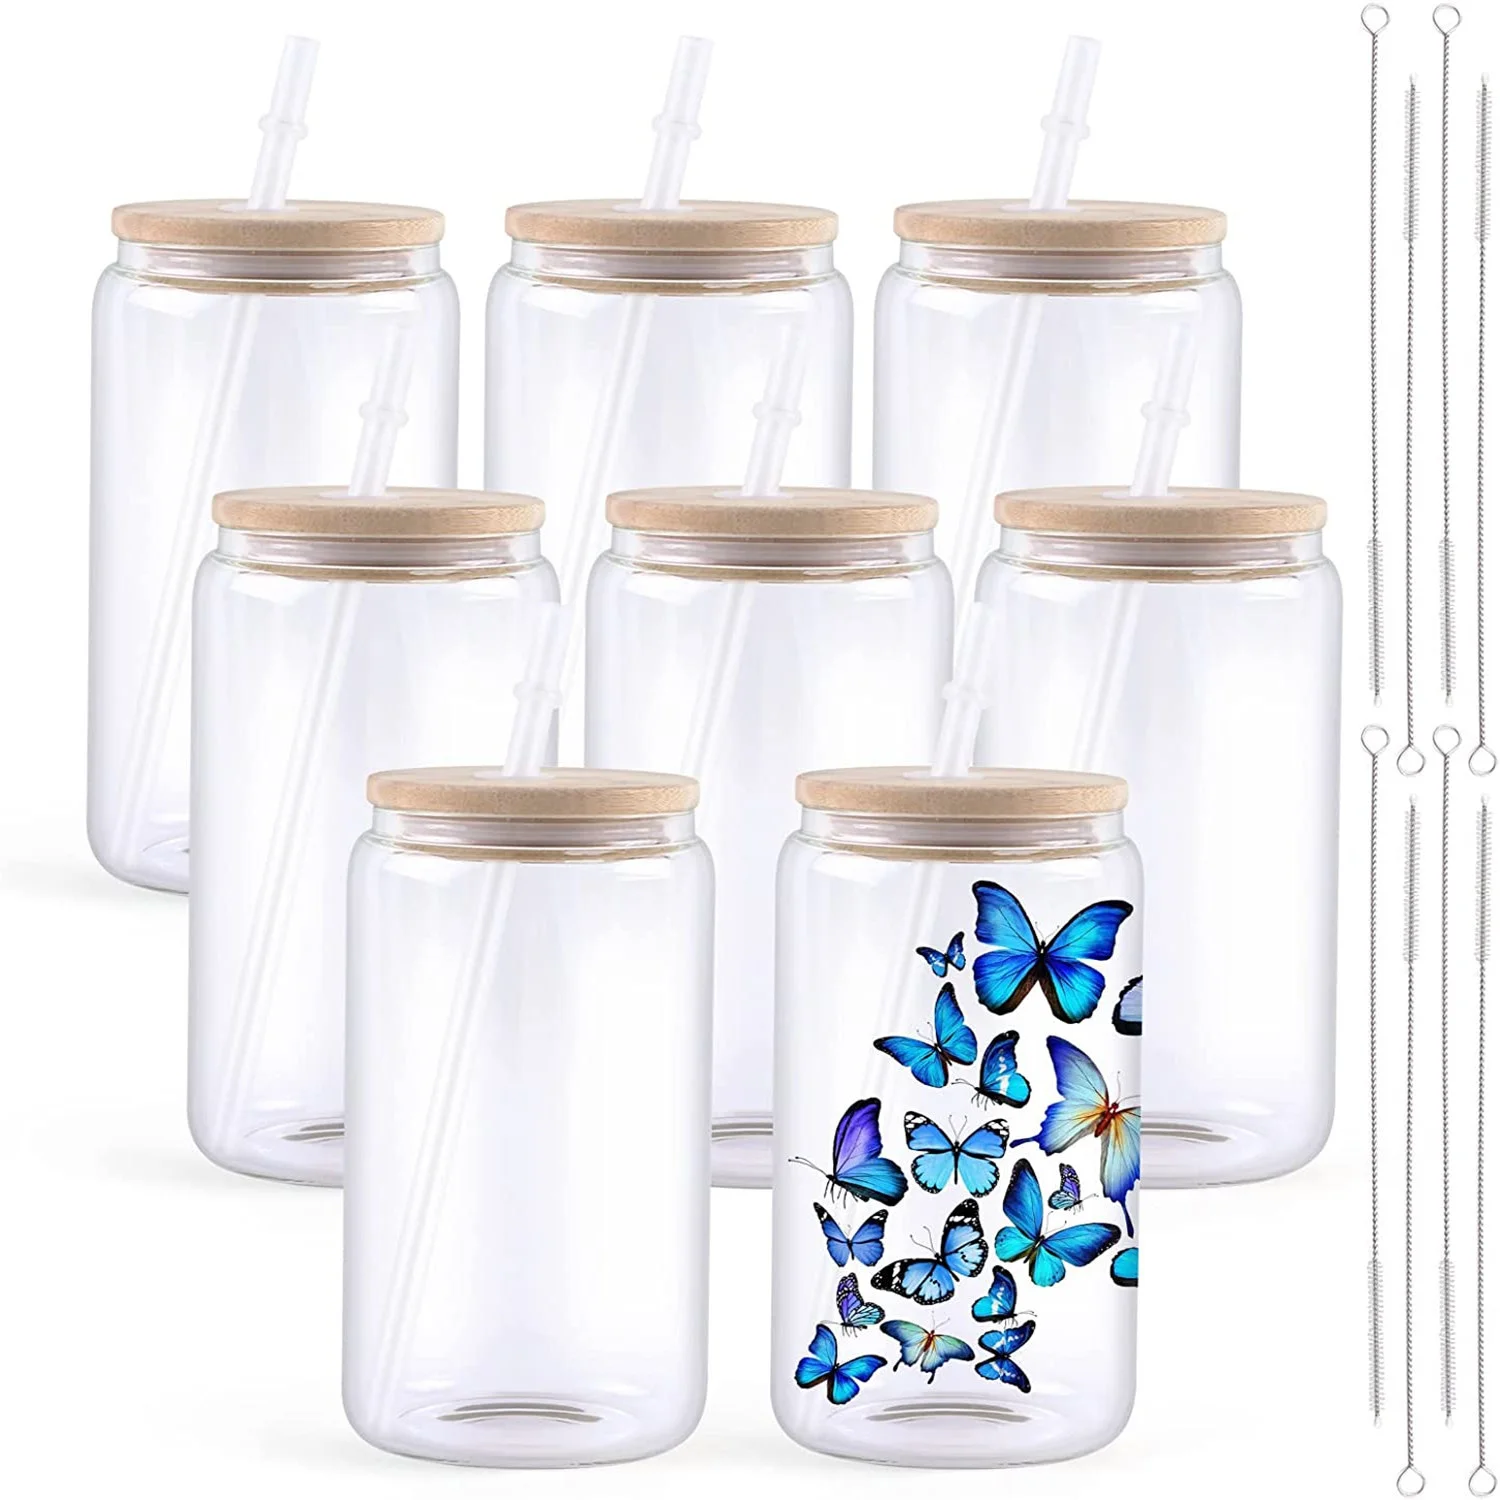 https://ae01.alicdn.com/kf/Sc7e8c1b065834949b38096a8d8df061cD/HTVRONT-8-4-Pack-16OZ-Clear-Frosted-Glass-Sublimation-Tumblers-with-Bamboo-Lid-Sublimate-Tumbler-Blanks.jpg